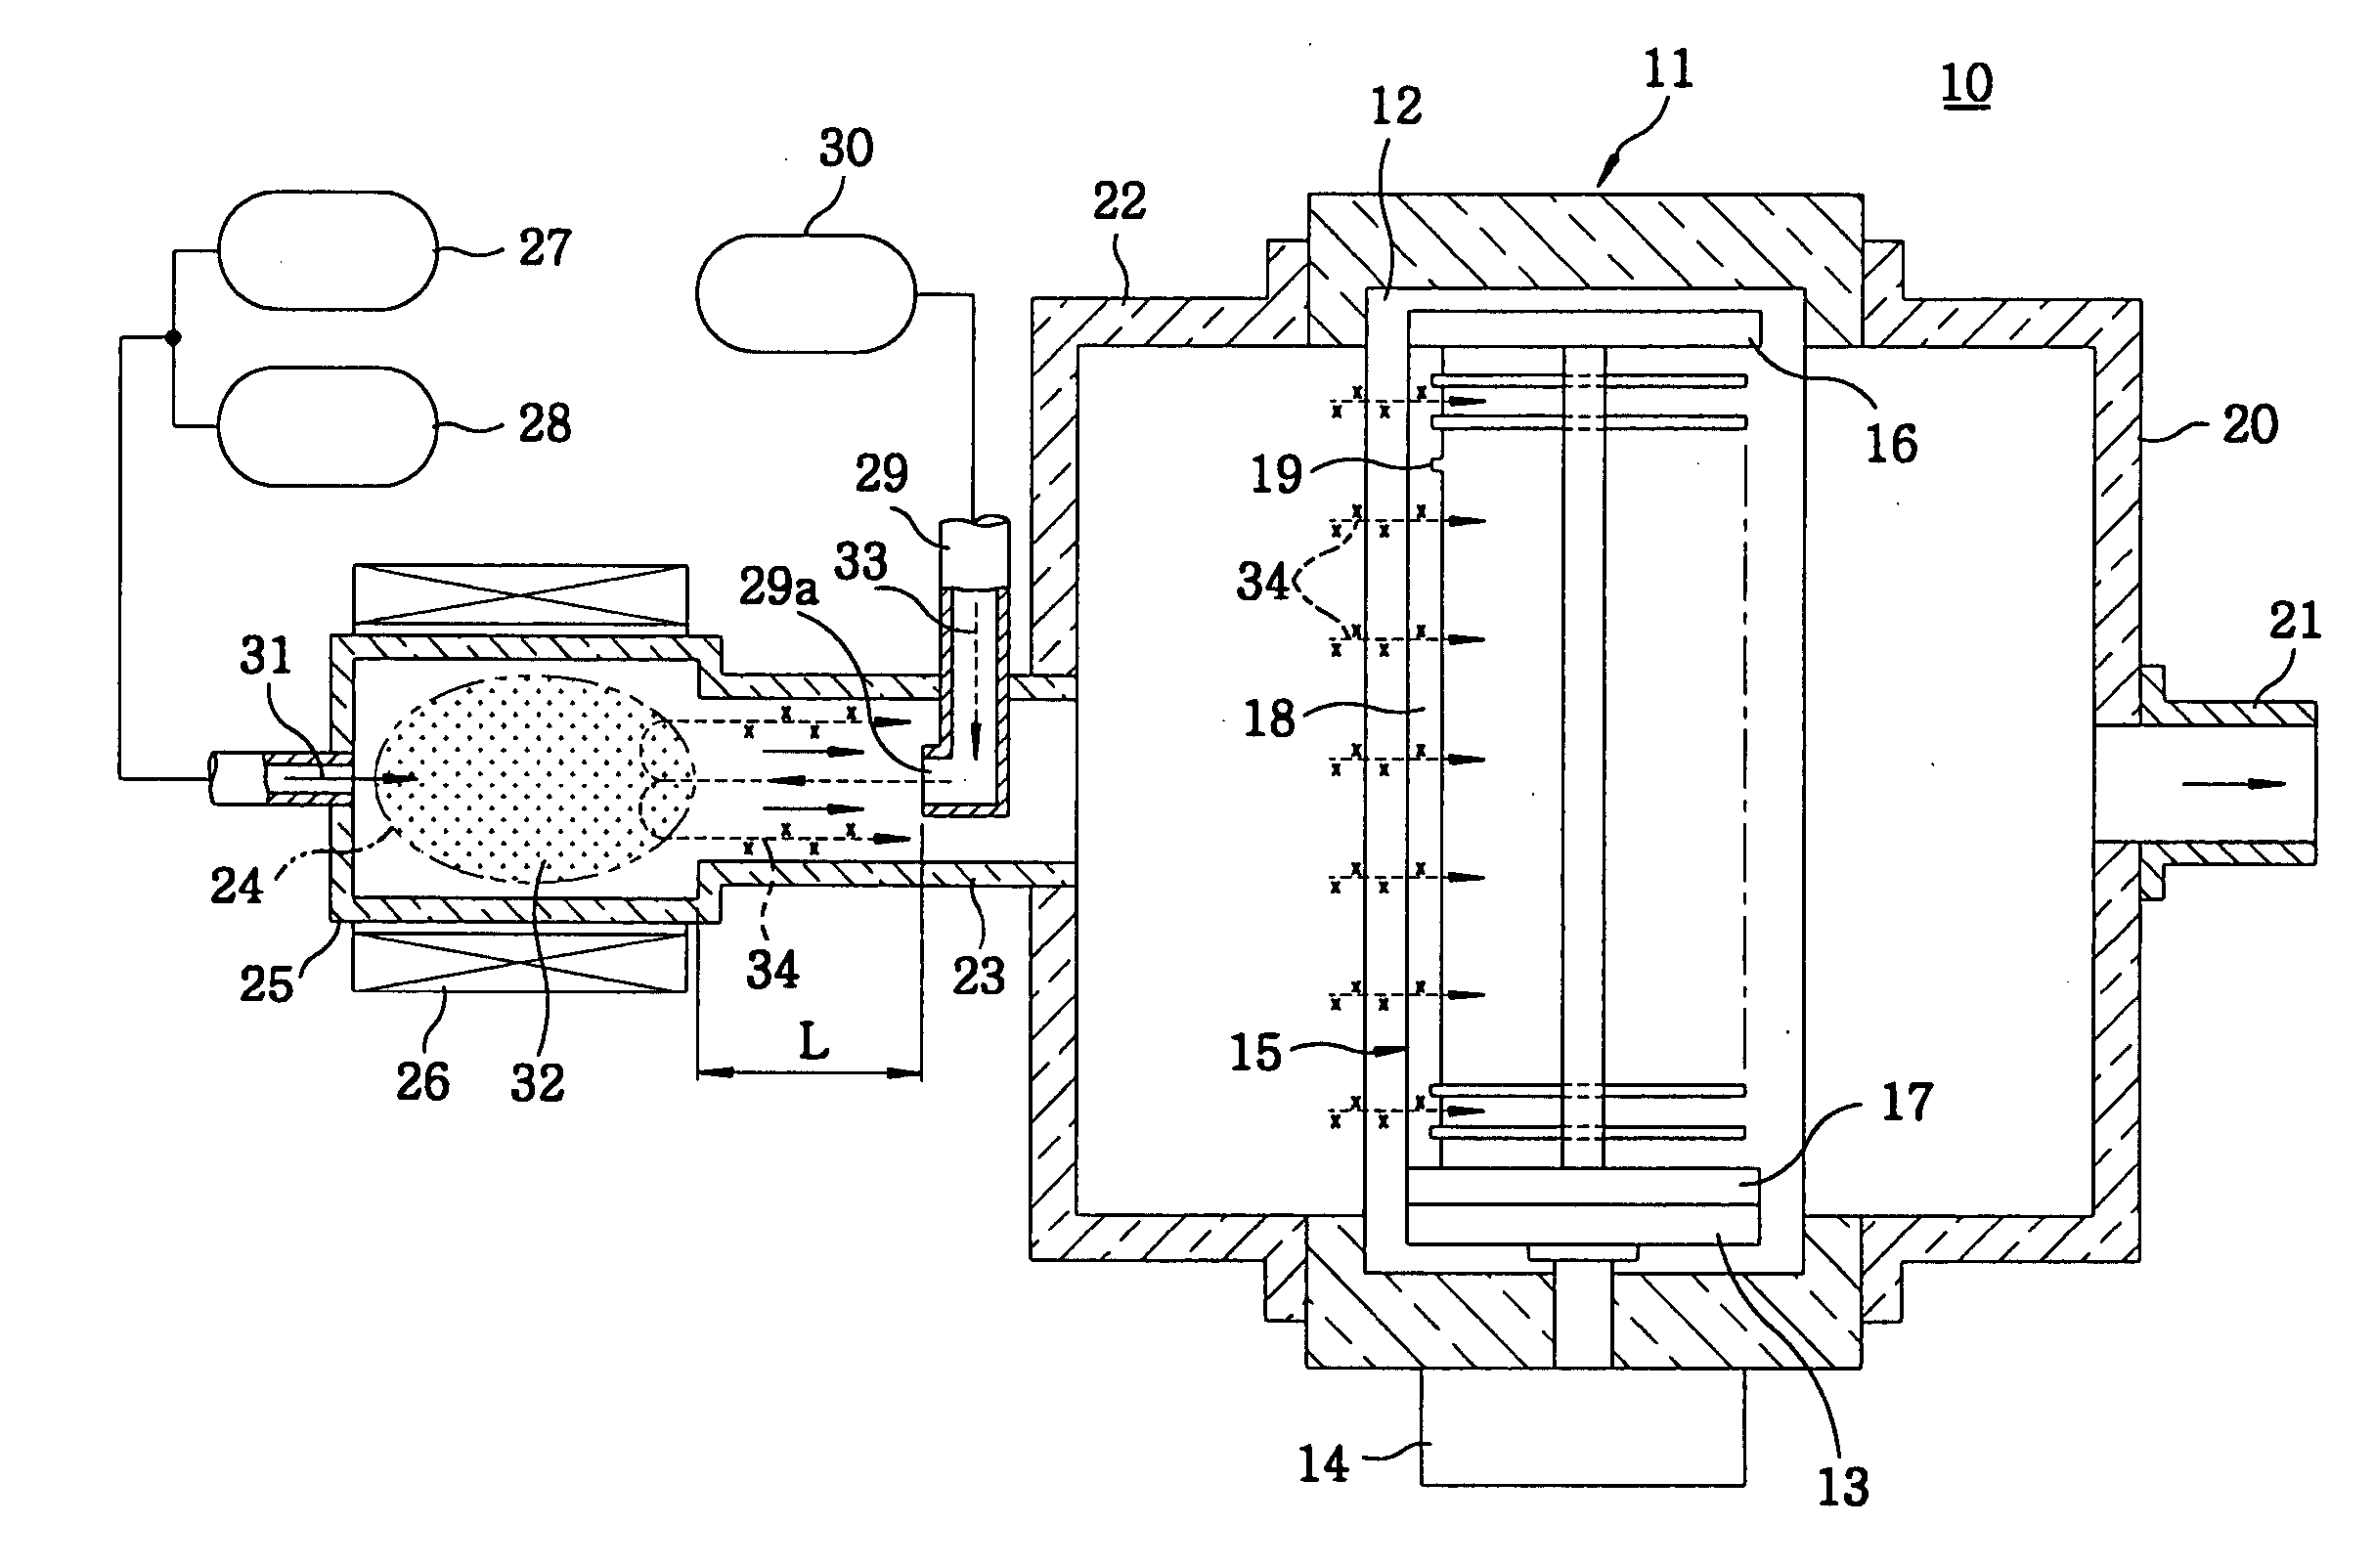 Method and apparatus for processing substrates